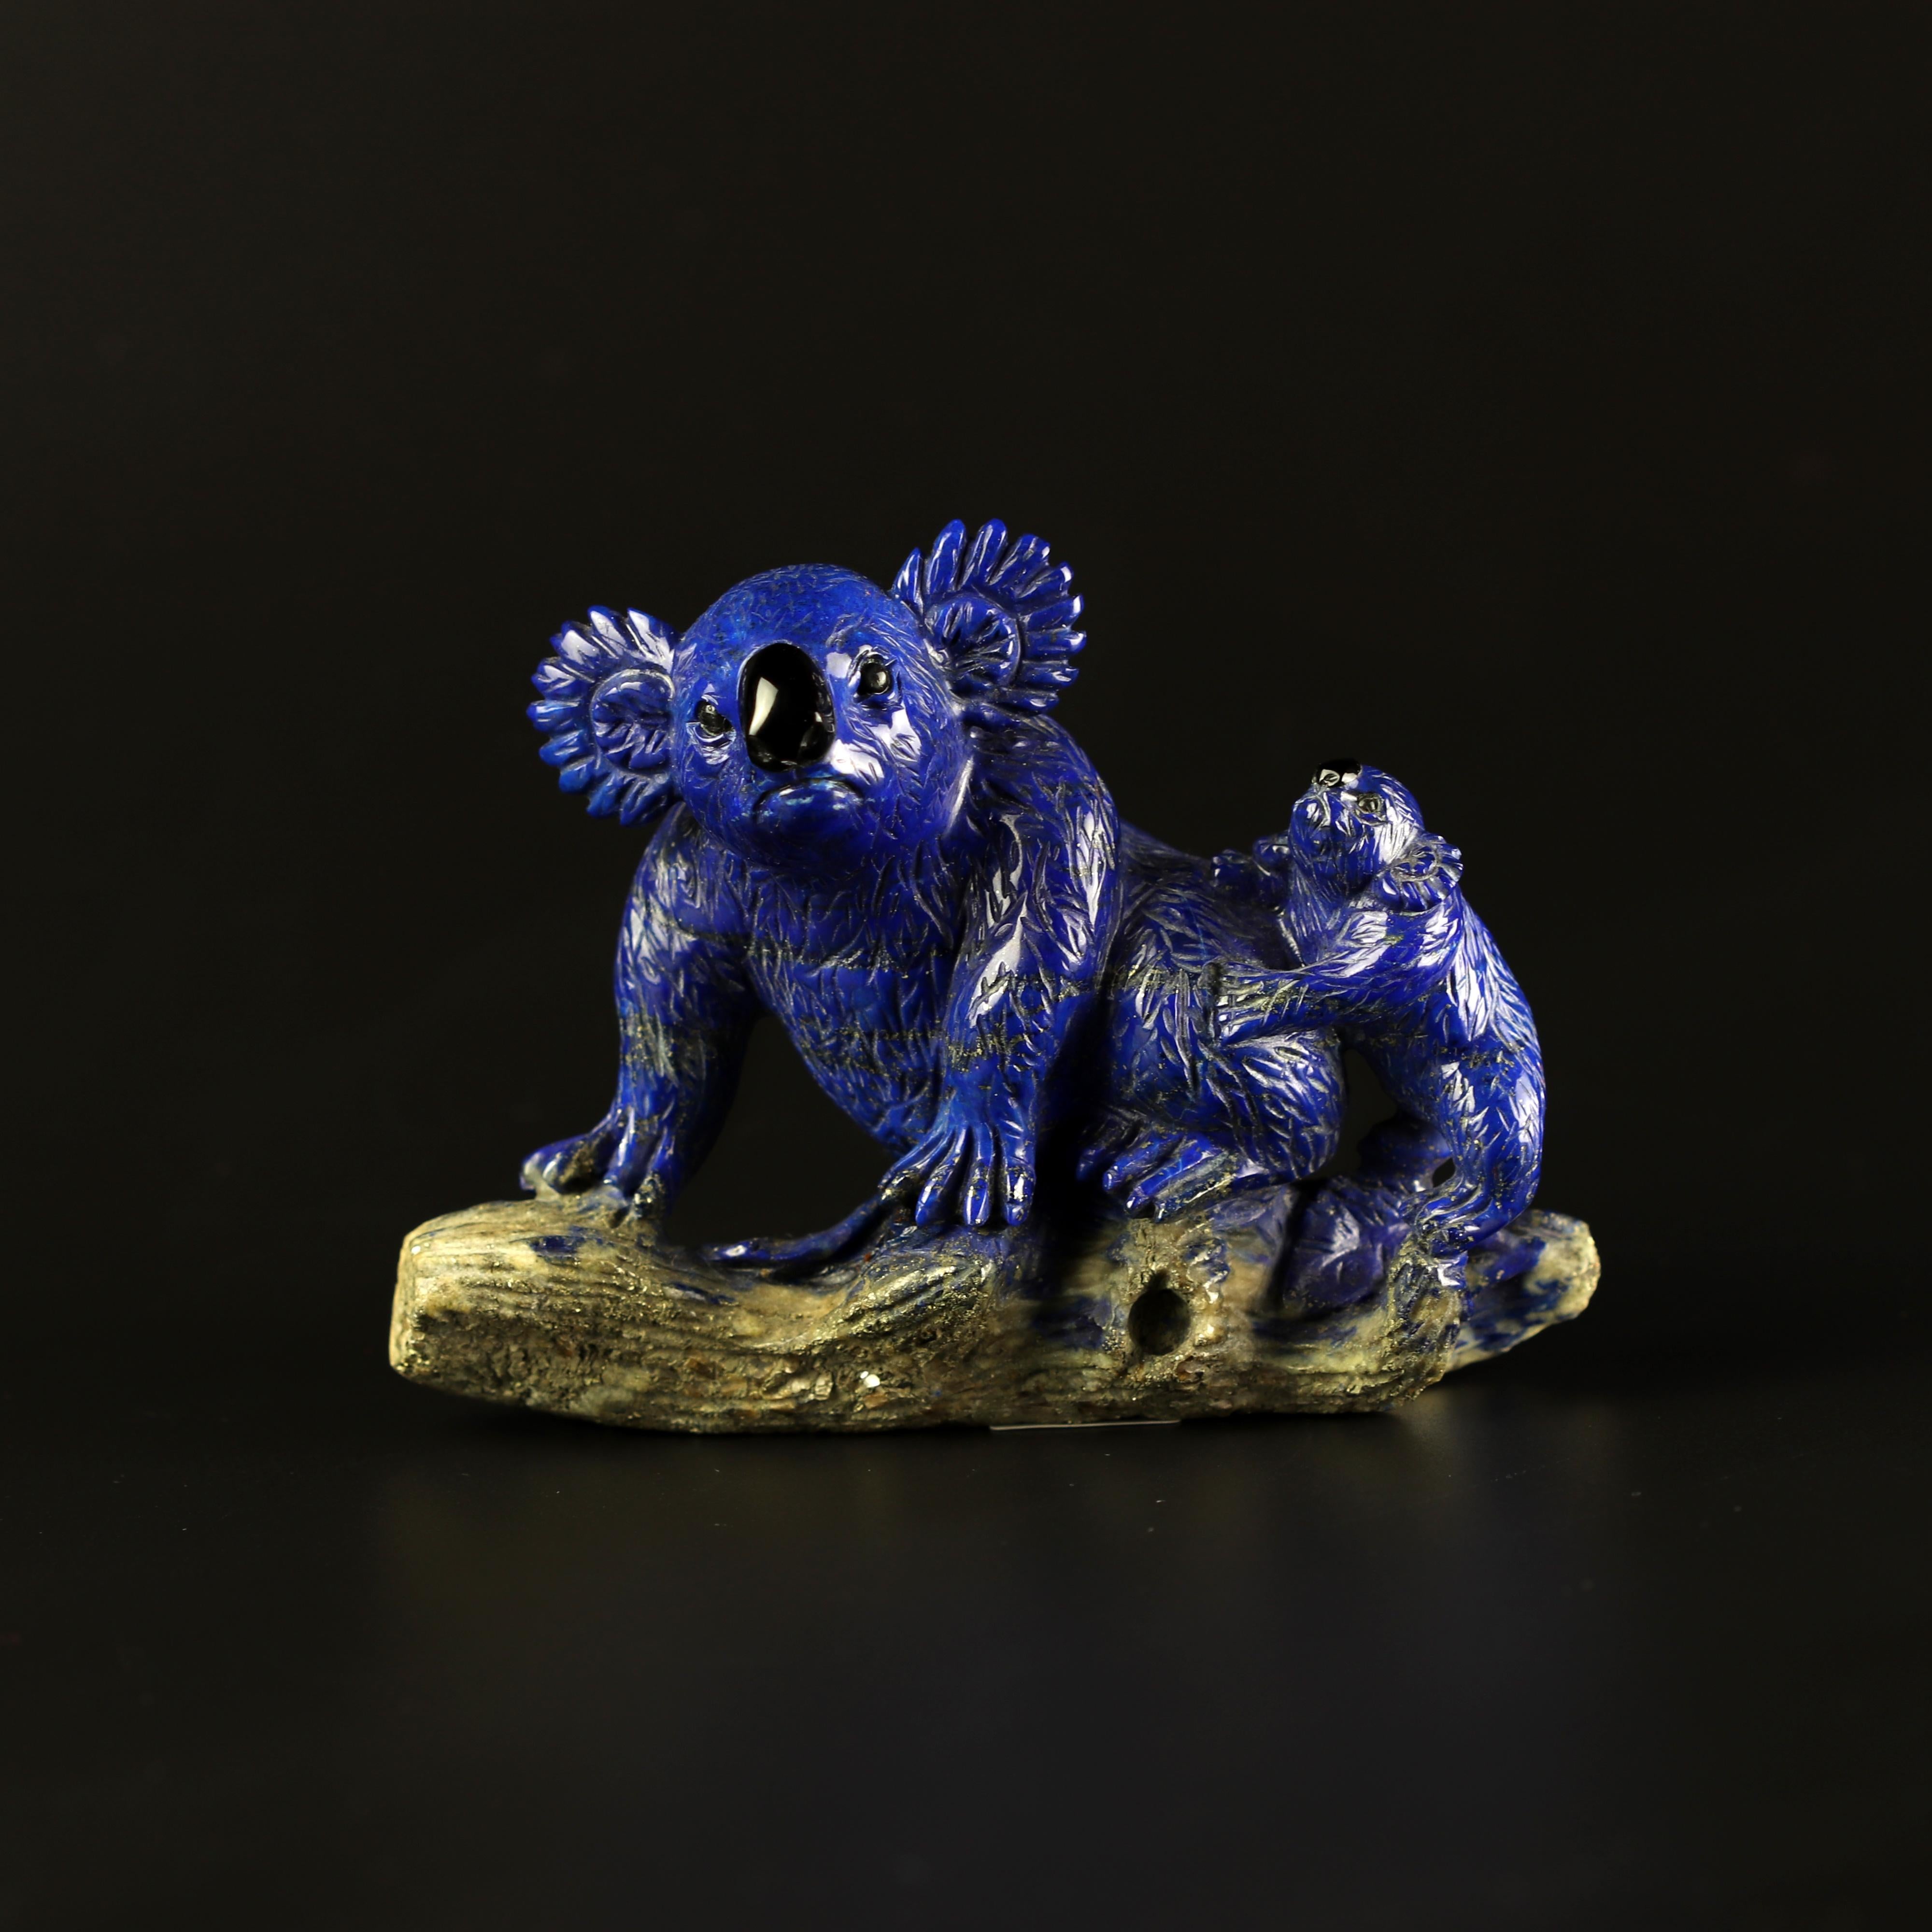 Important acquisition in the late 1970s in Hong Kong. This gentil gemstone offers a passionate colour in a precious way. Carved with extreme detail by fantastic local artists which transform raw stones into unique art works. This Koala family